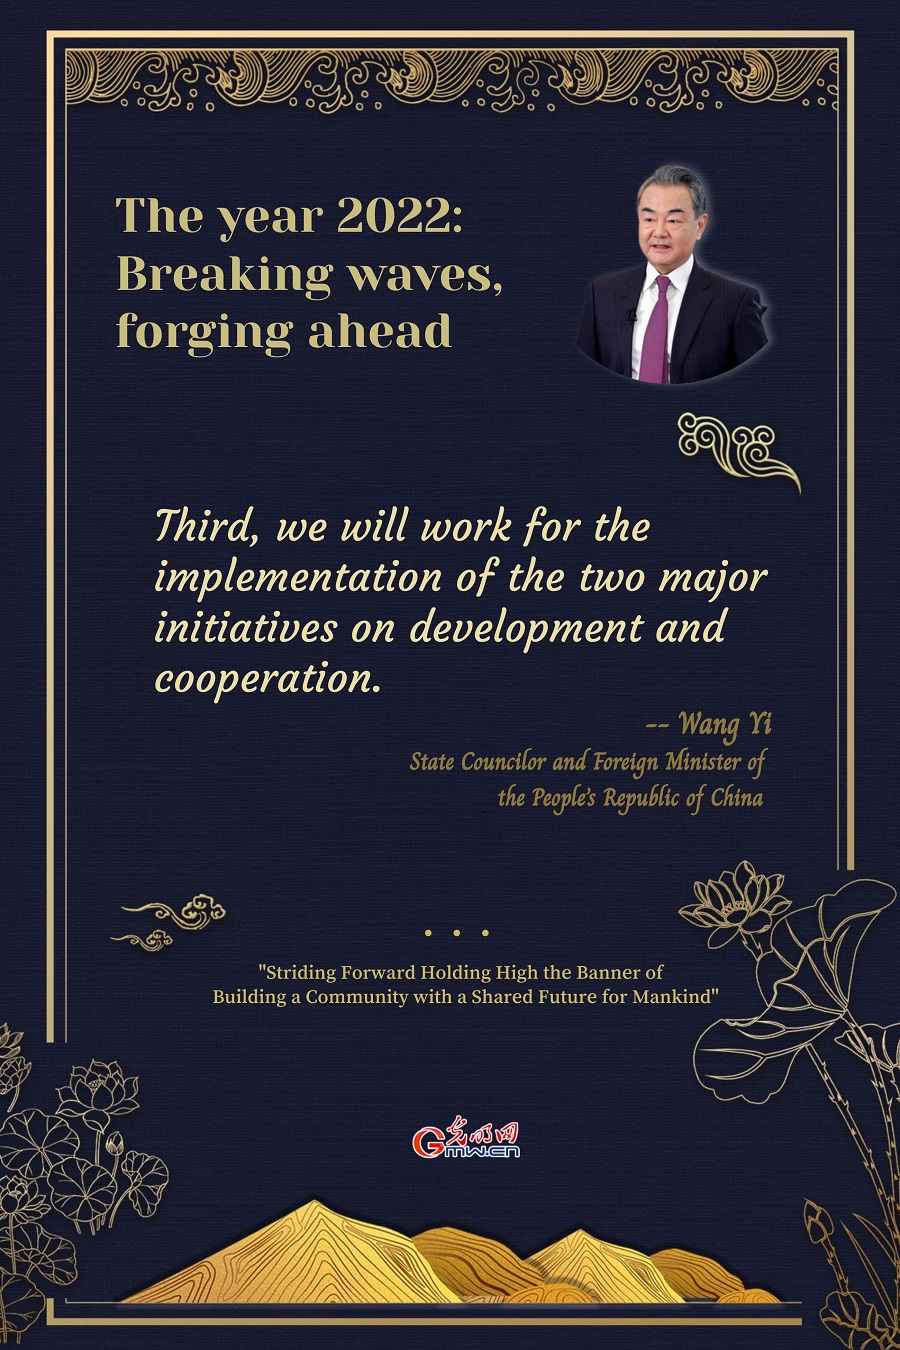 The year 2022: Breaking waves, forging ahead